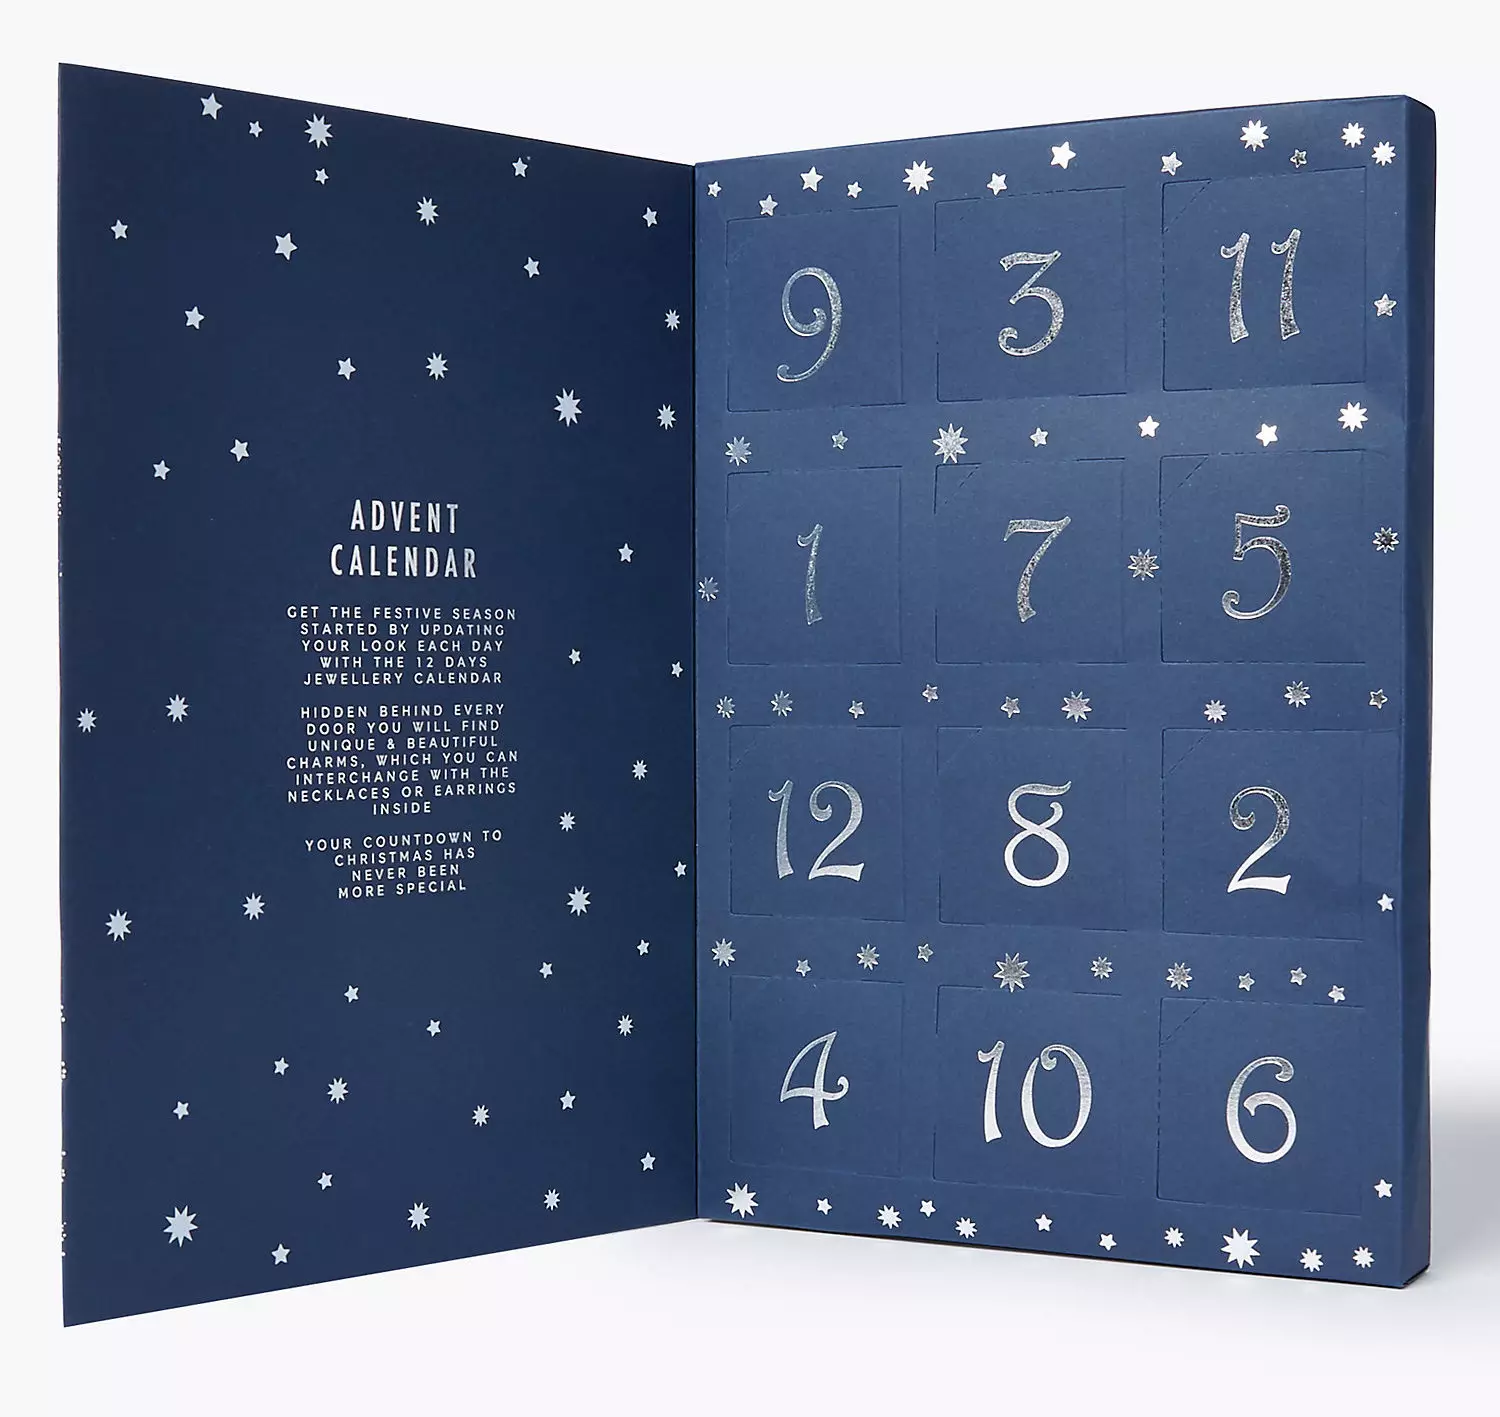 The pieces are housed in an inky-blue box patterned with silver stars. (